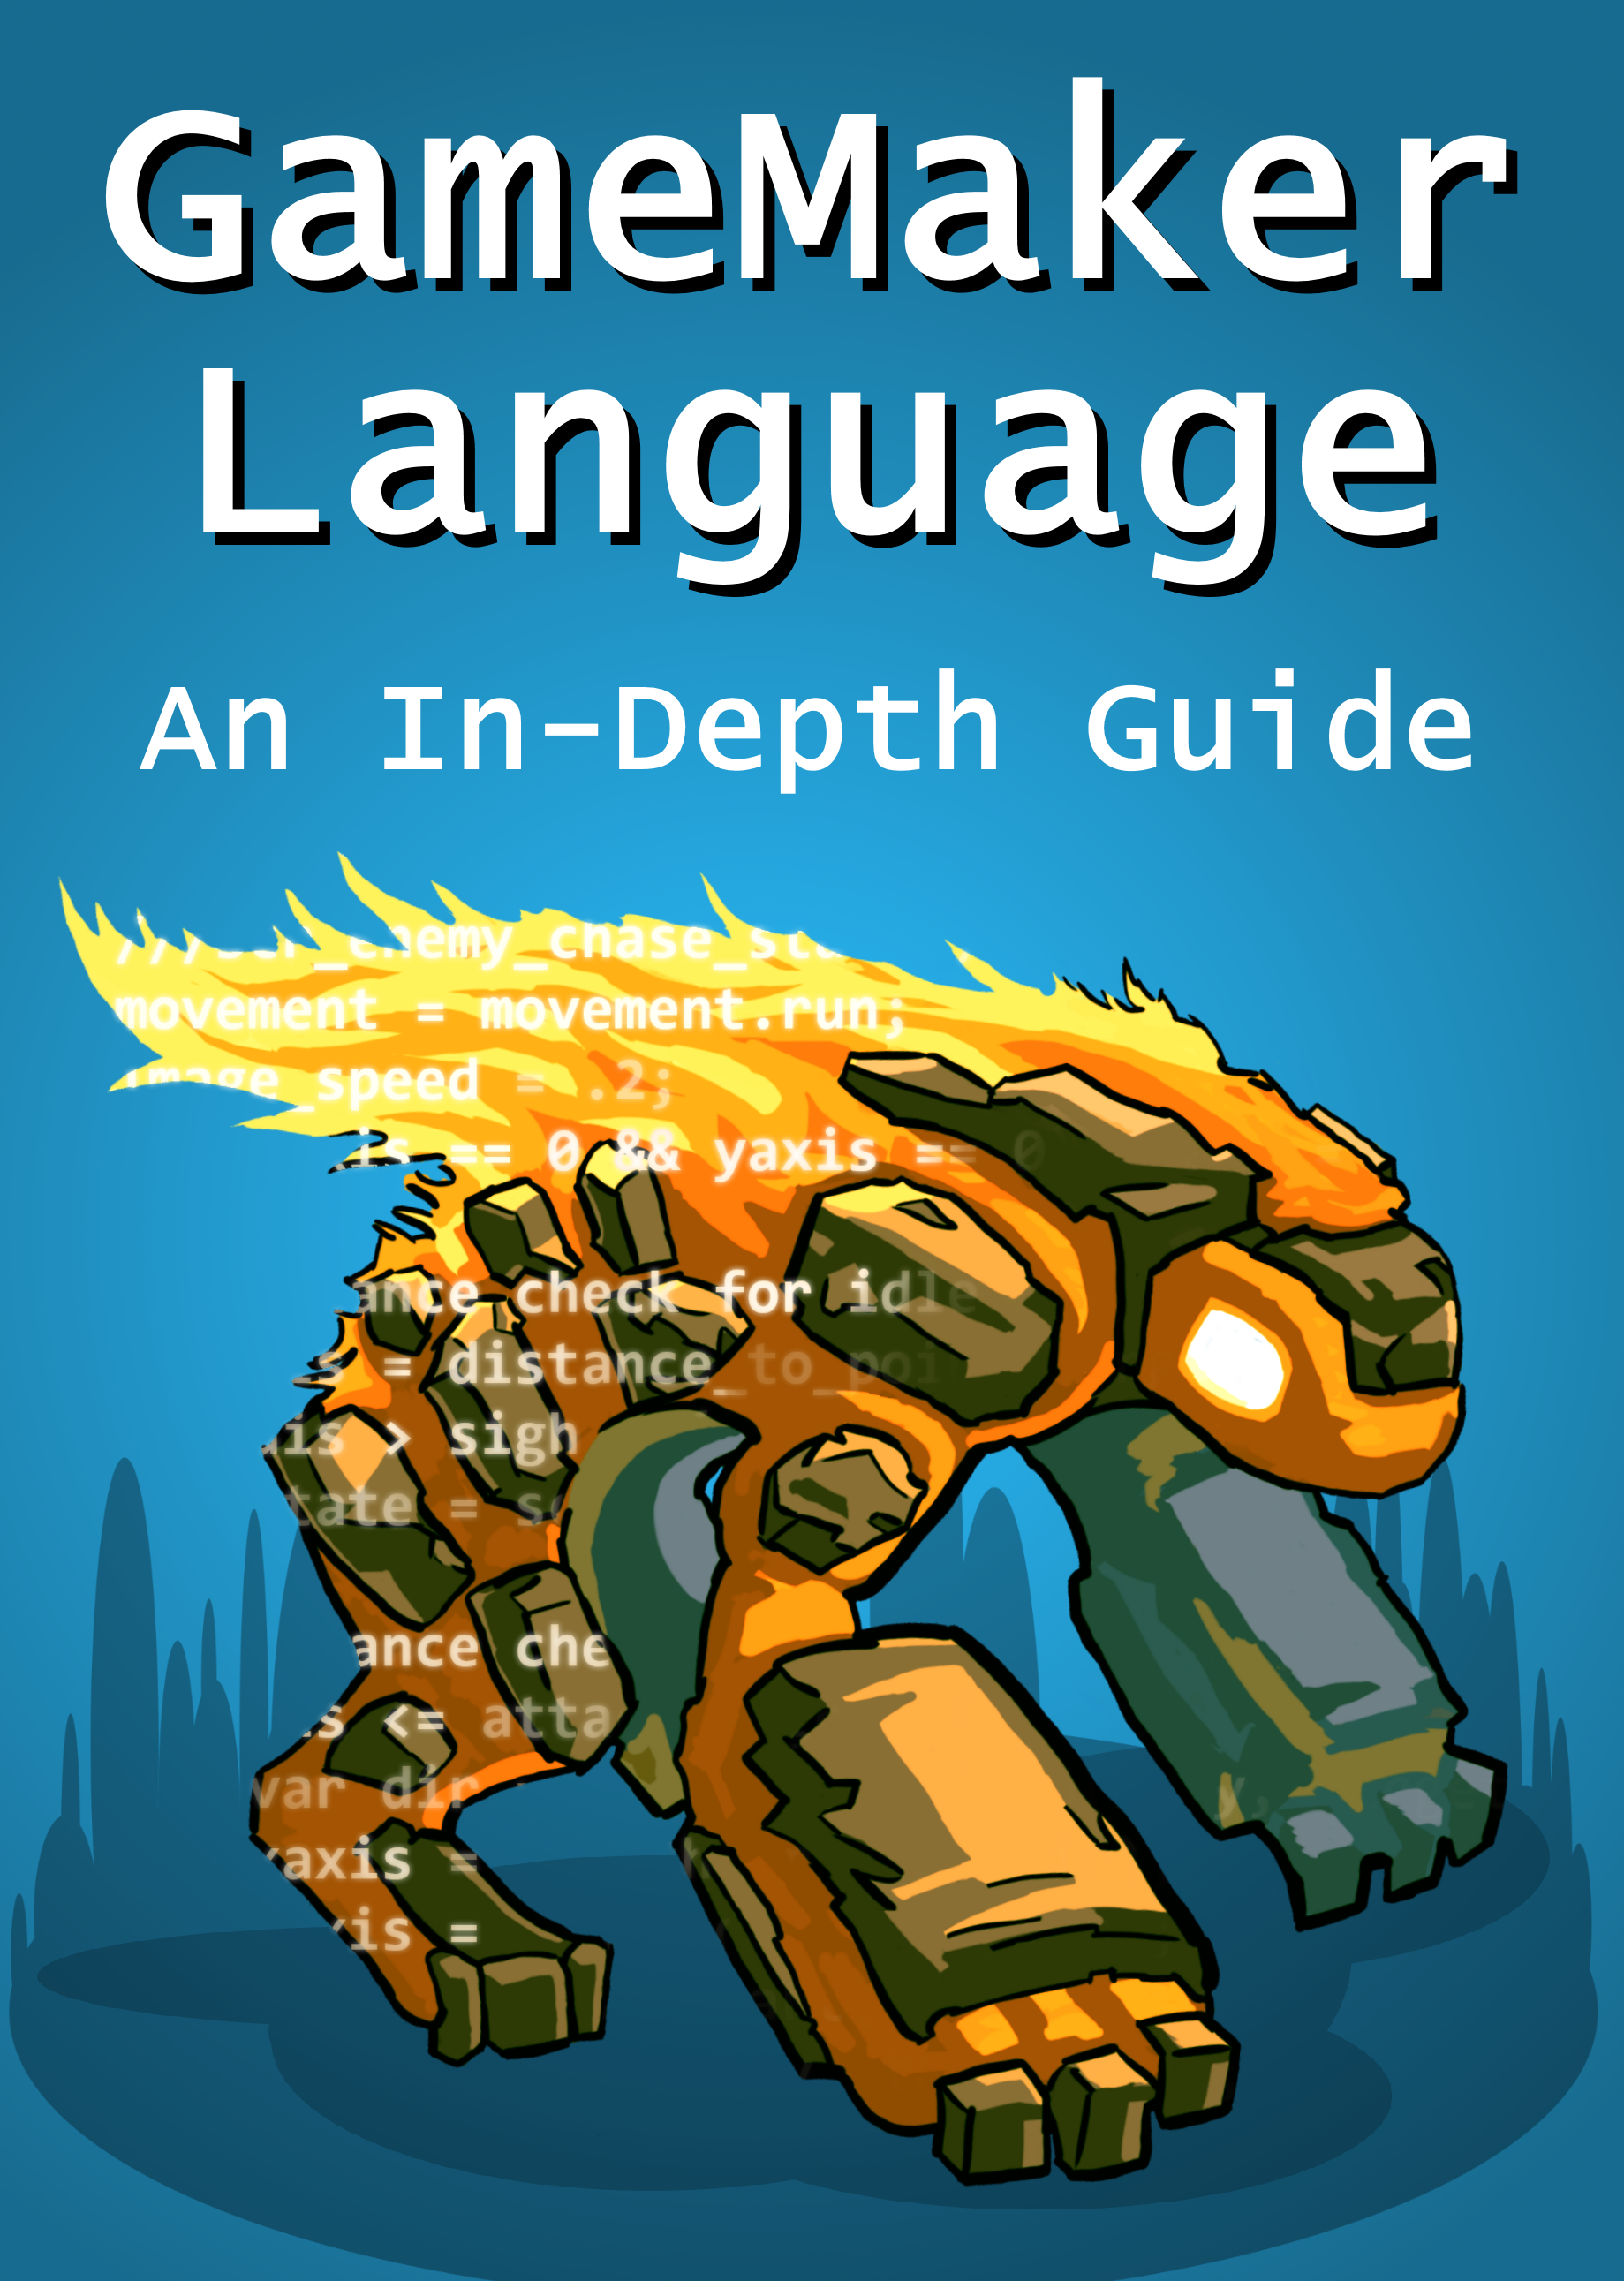 GameMaker Language: An In-Depth Guide (V ) by Heartbeast